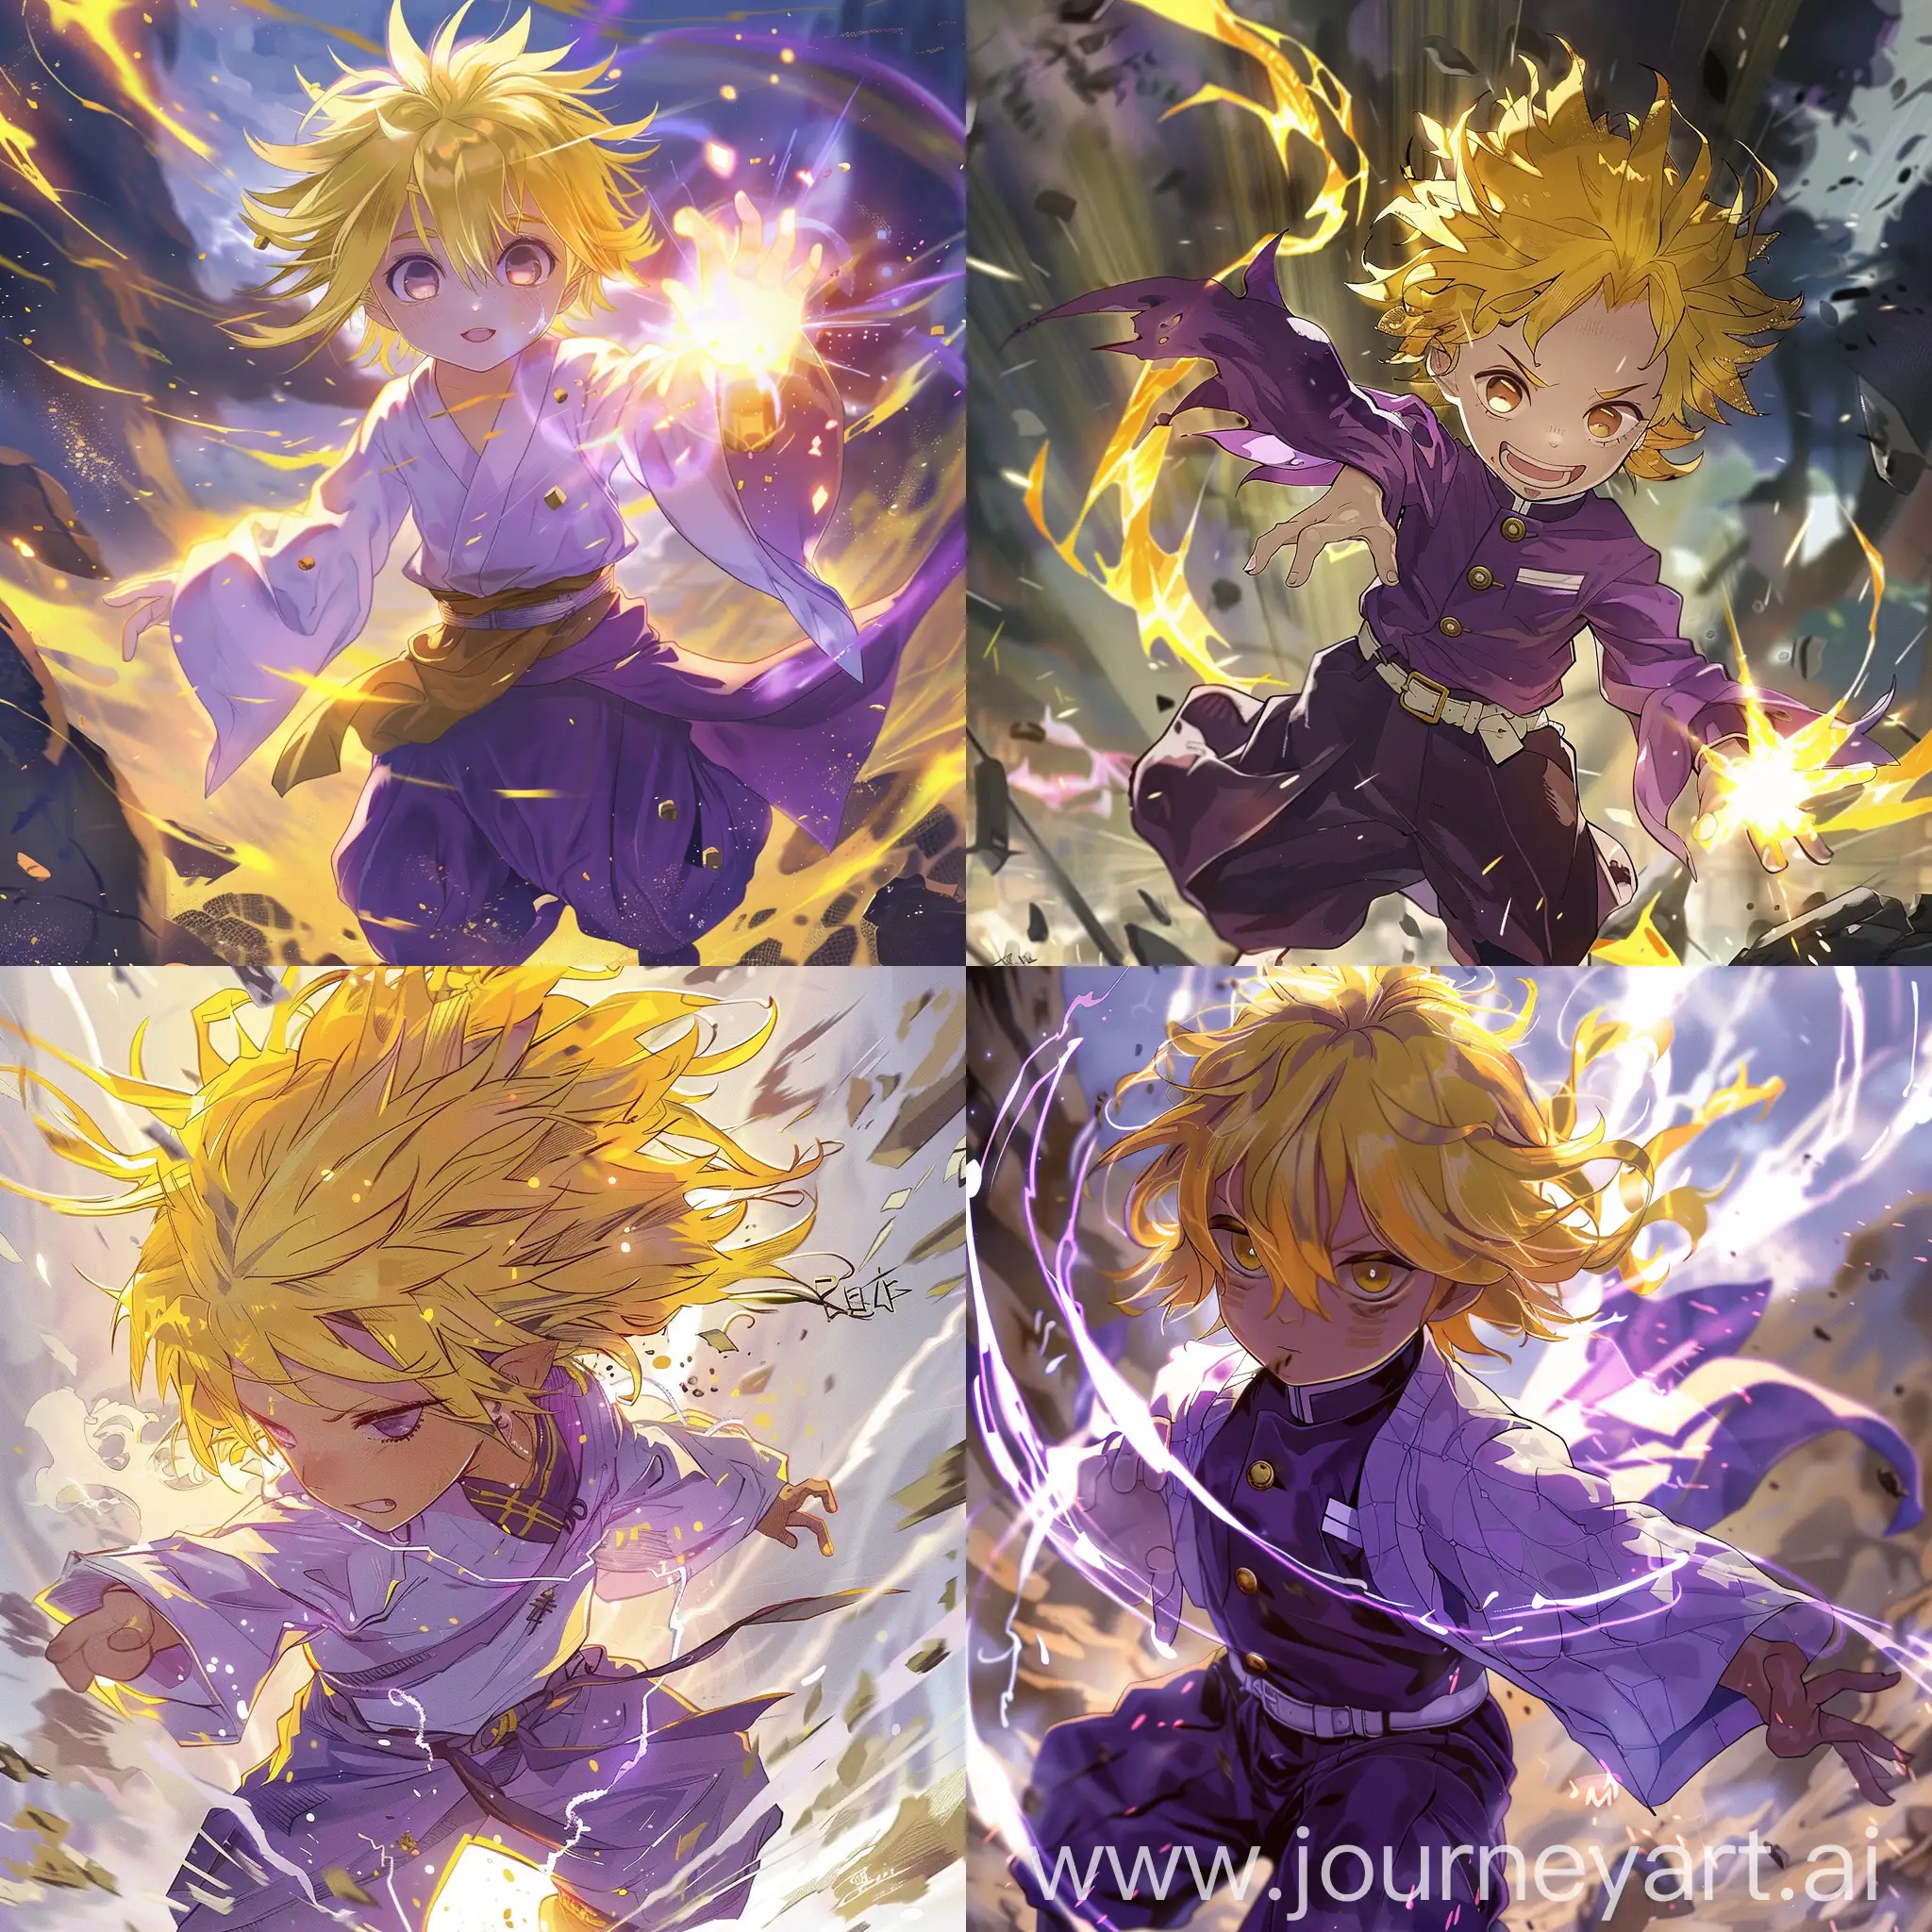 An anime style powerful transformation of a light child, with yellow hair and purple clothes, from a fantasy novel.